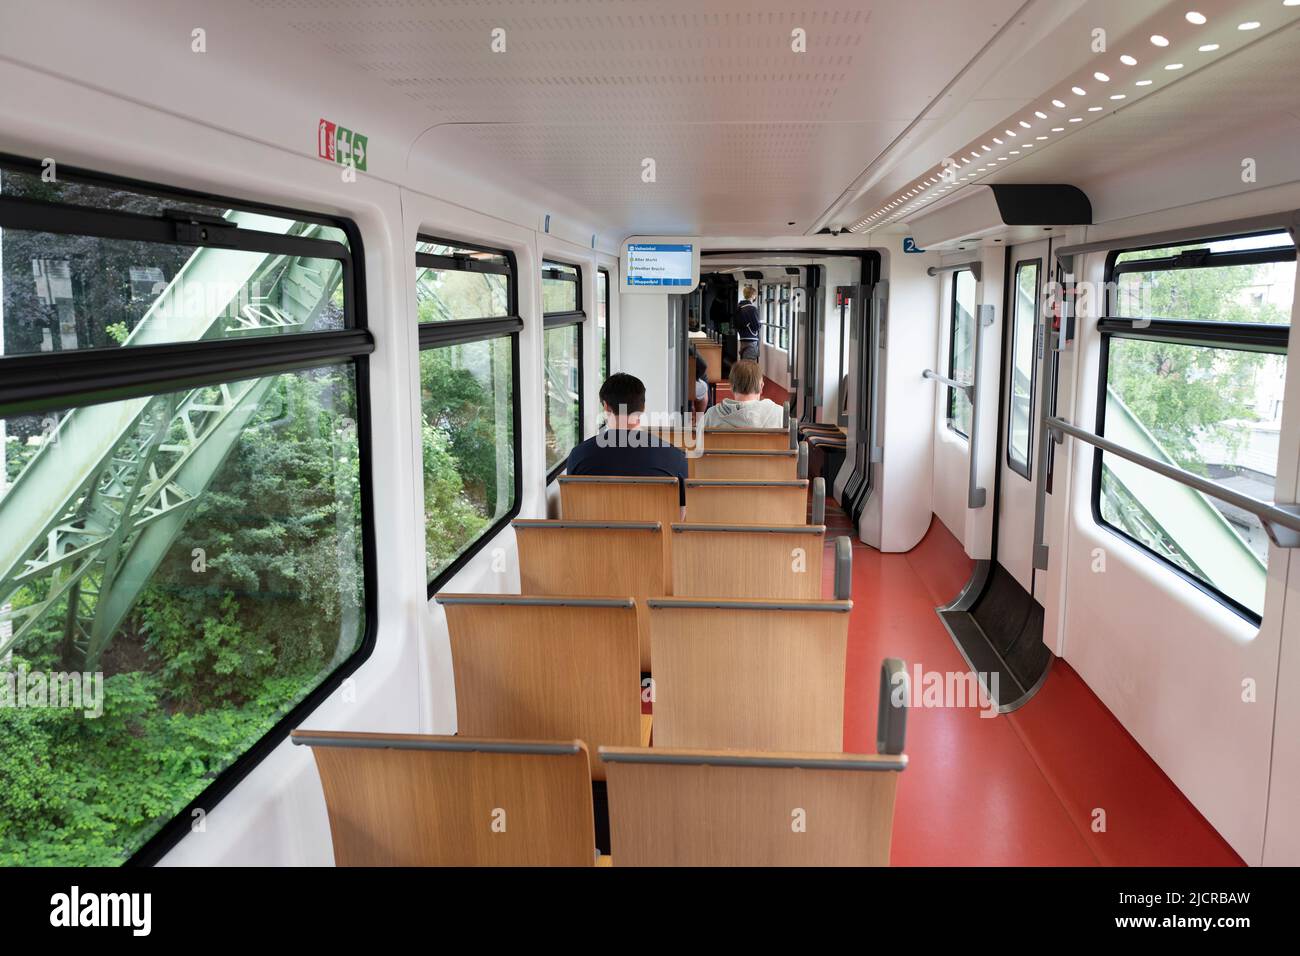 Inside a carriage on the Wuppertal Suspension Railway, Germany Stock Photo